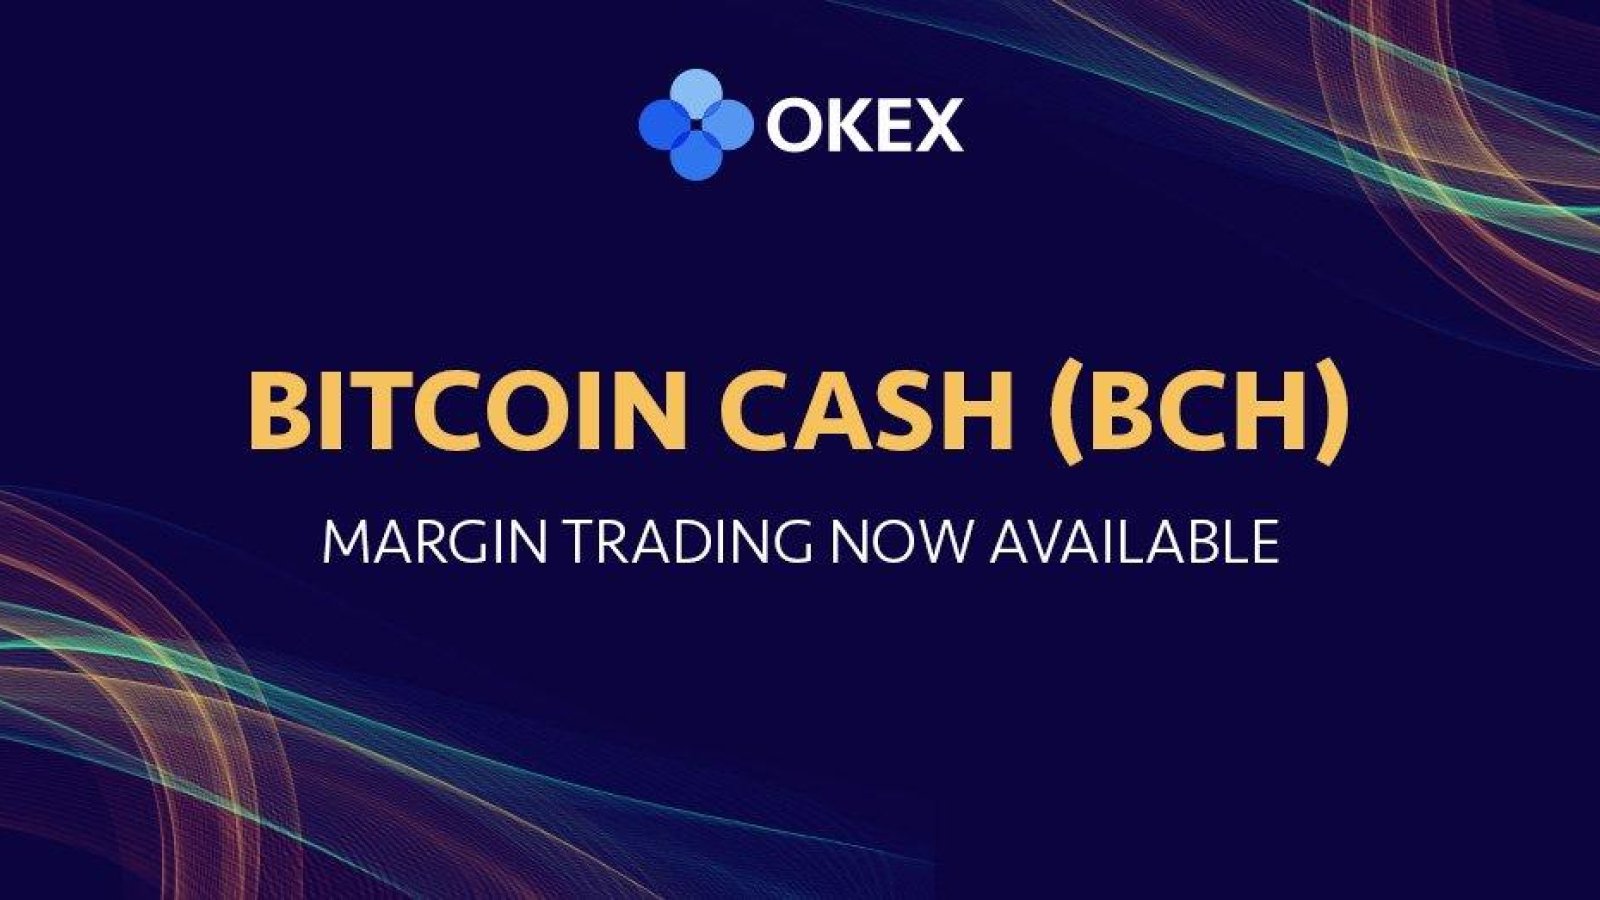 OKEx Exchange Makes Bitcoin Cash Available for Margin Trading 